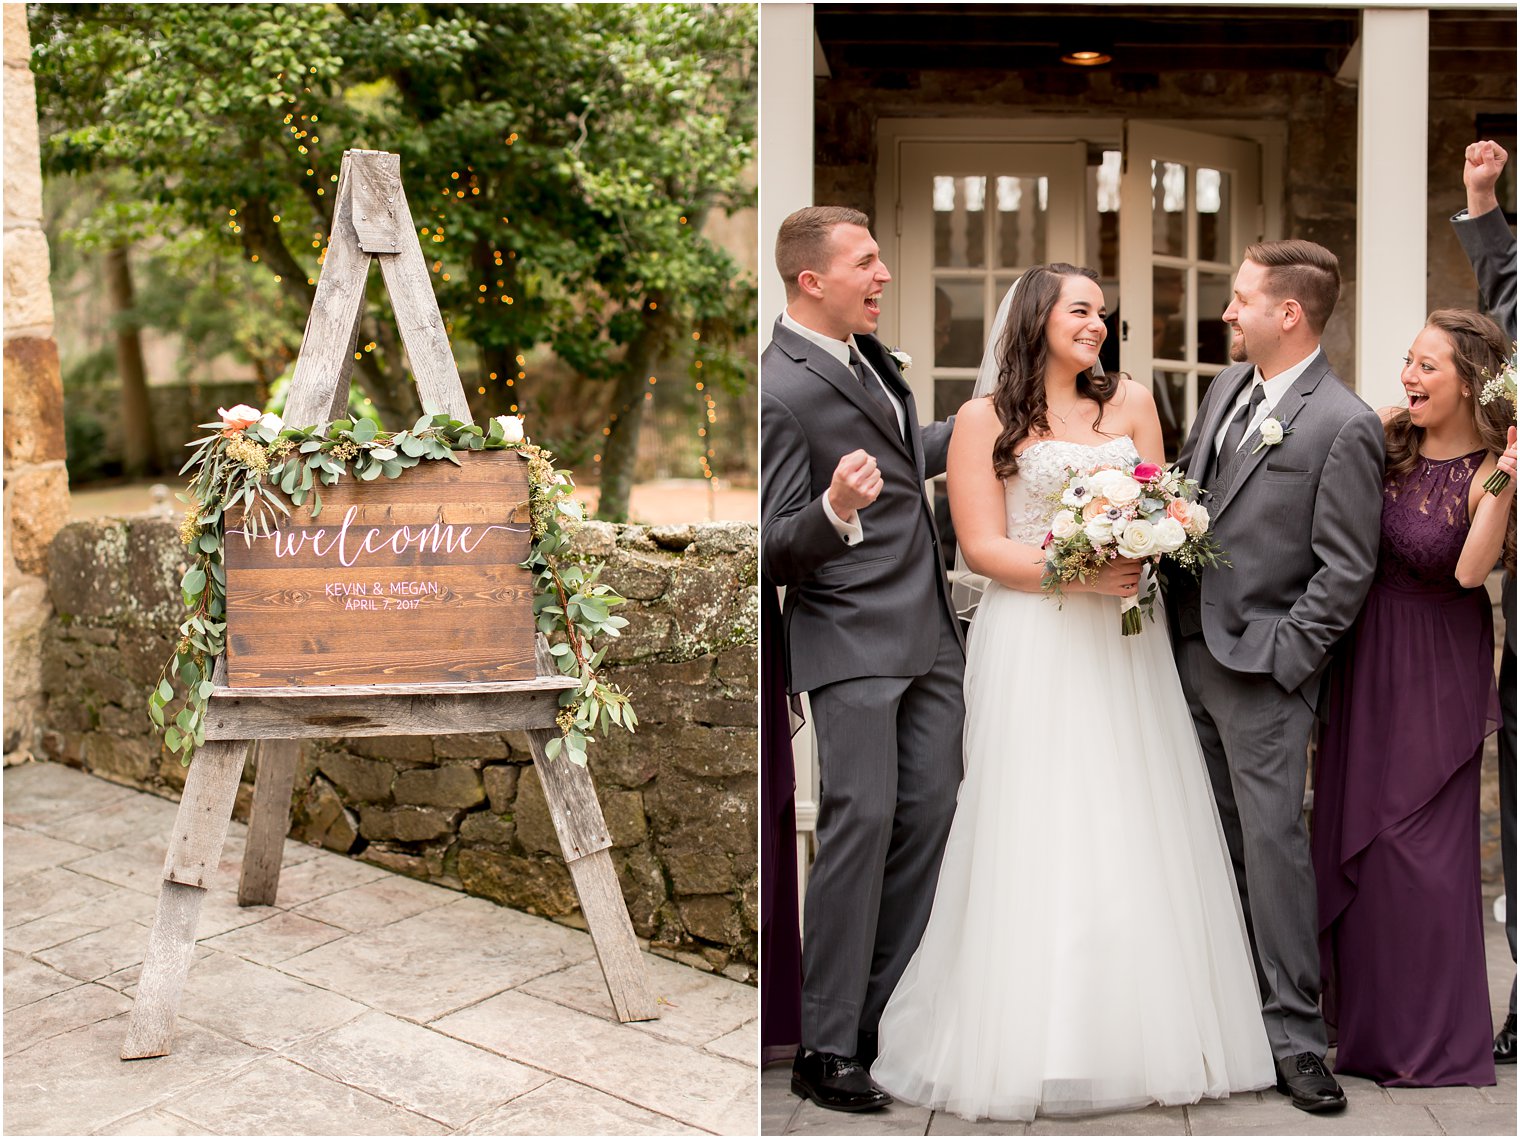 Rustic PA wedding | Wedding at Holly Hedge Estate in New Hope, PA